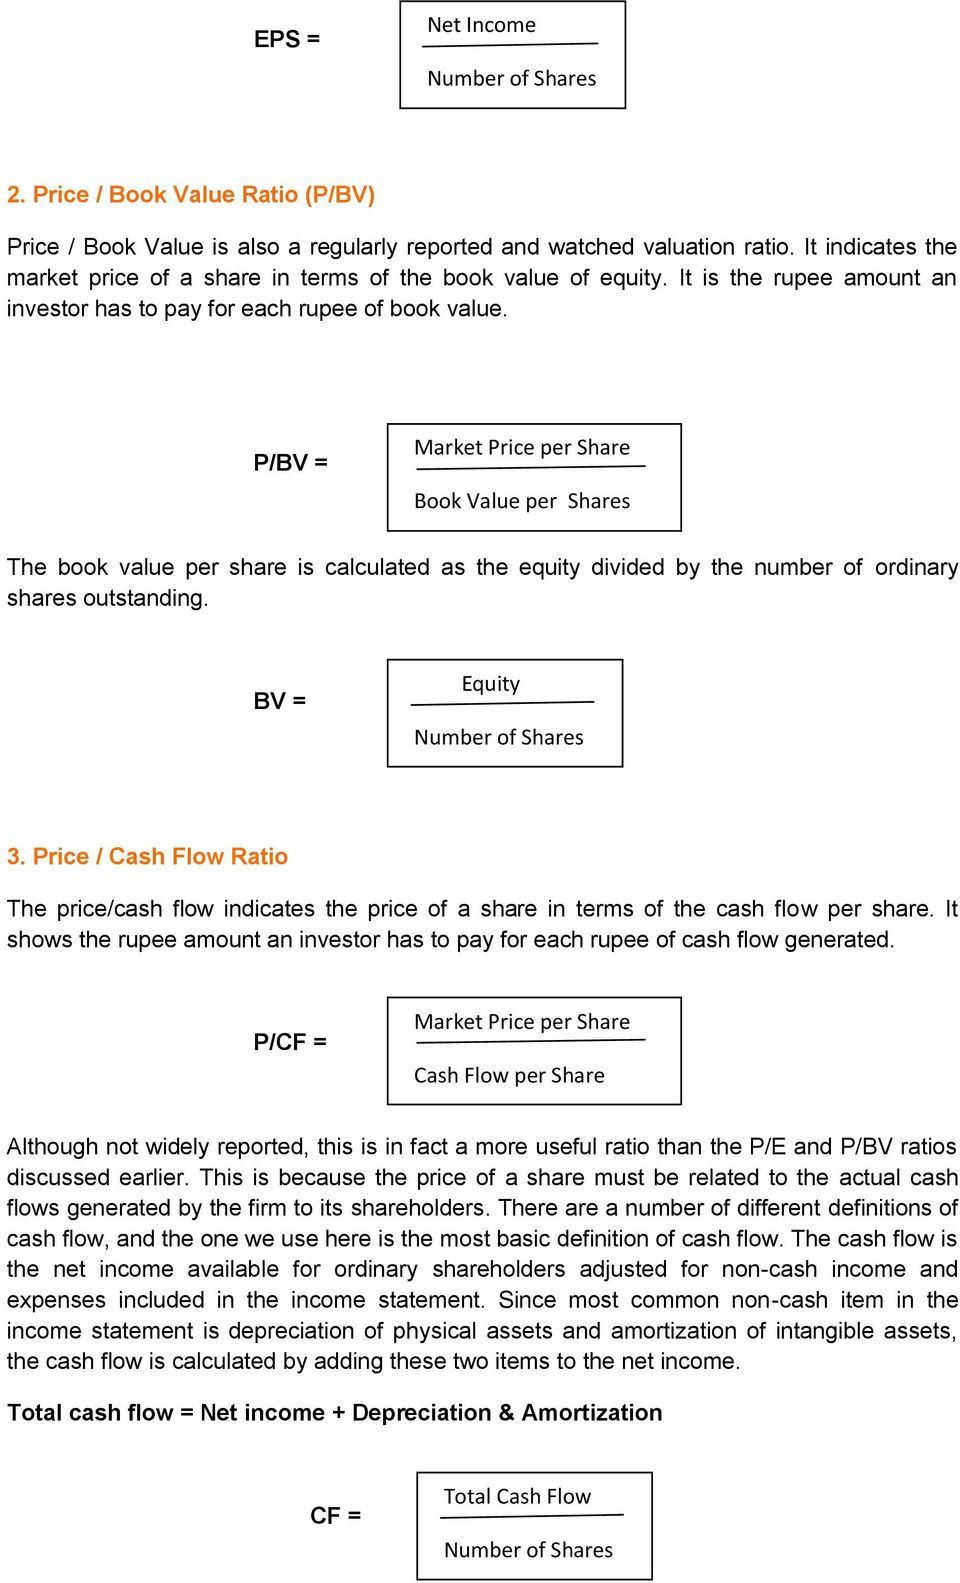 P/BV = Market Price per Share Book Value per Shares The book value per share is calculated as the equity divided by the number of ordinary shares outstanding. BV = Equity Number of Shares 3.